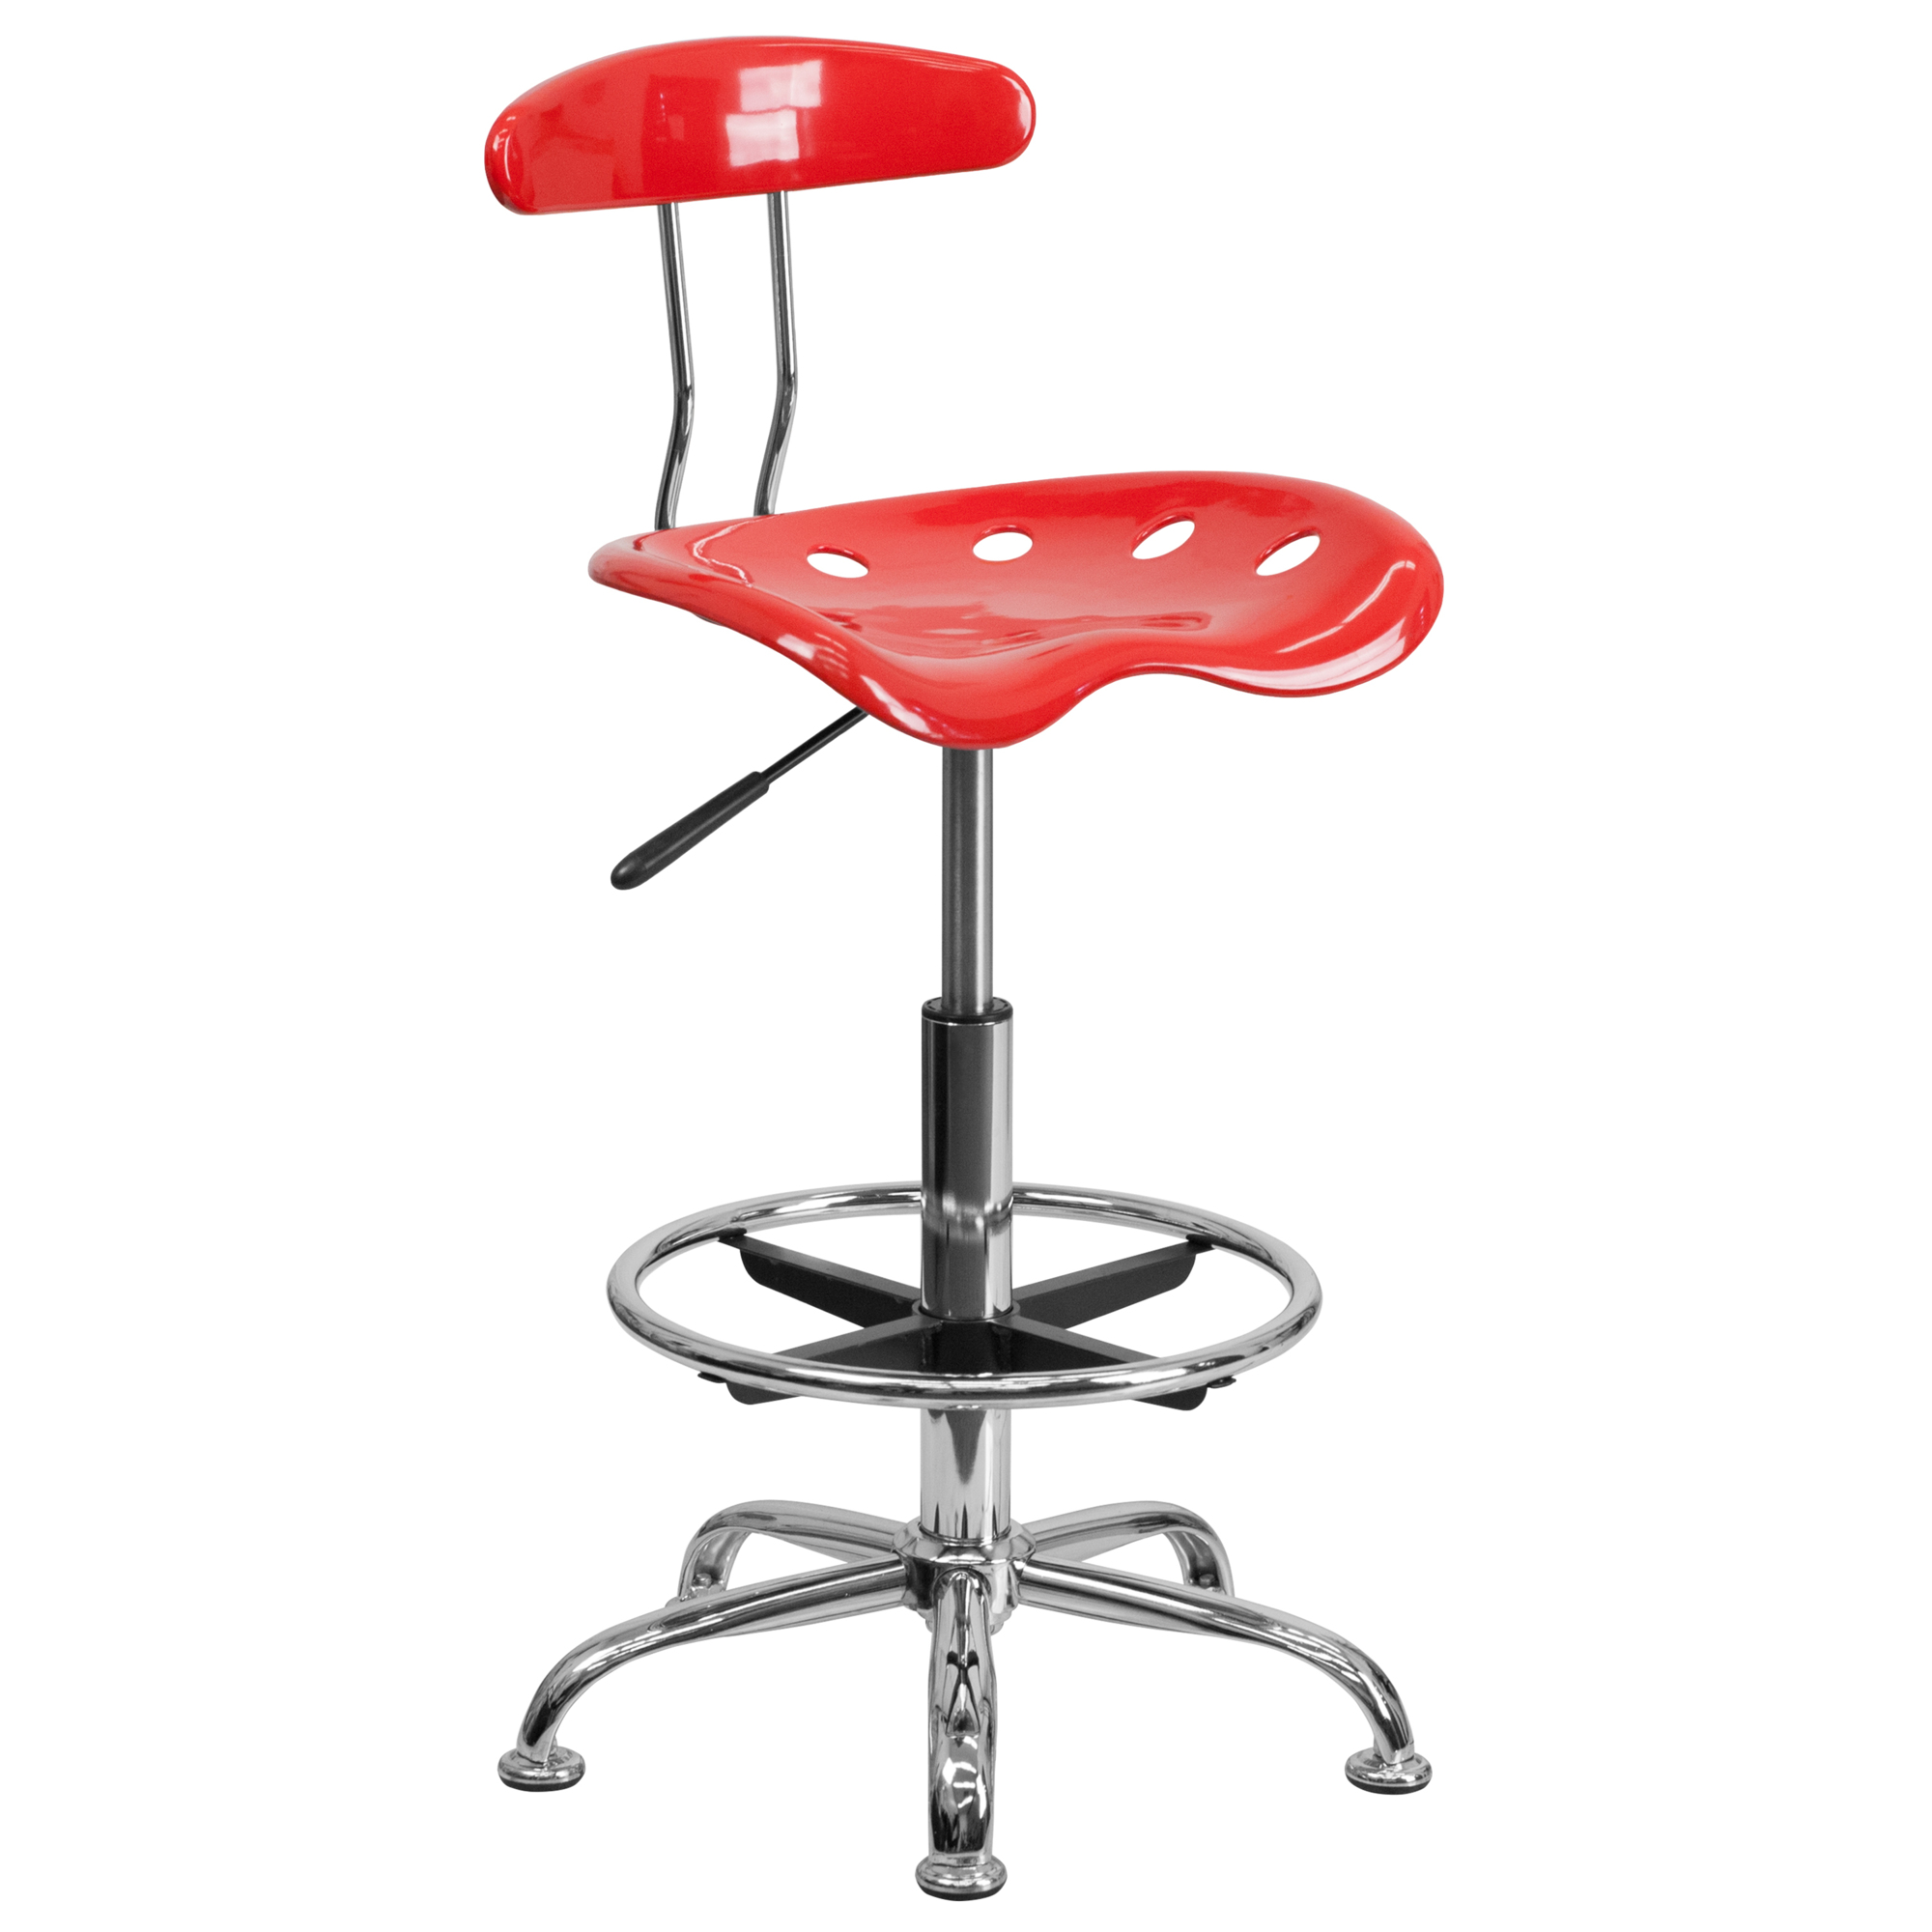 Flash Furniture, Vibrant Cherry Tomato and Chrome Drafting Stool, Primary Color Red, Included (qty.) 1, Model LF215CHYTOMATO